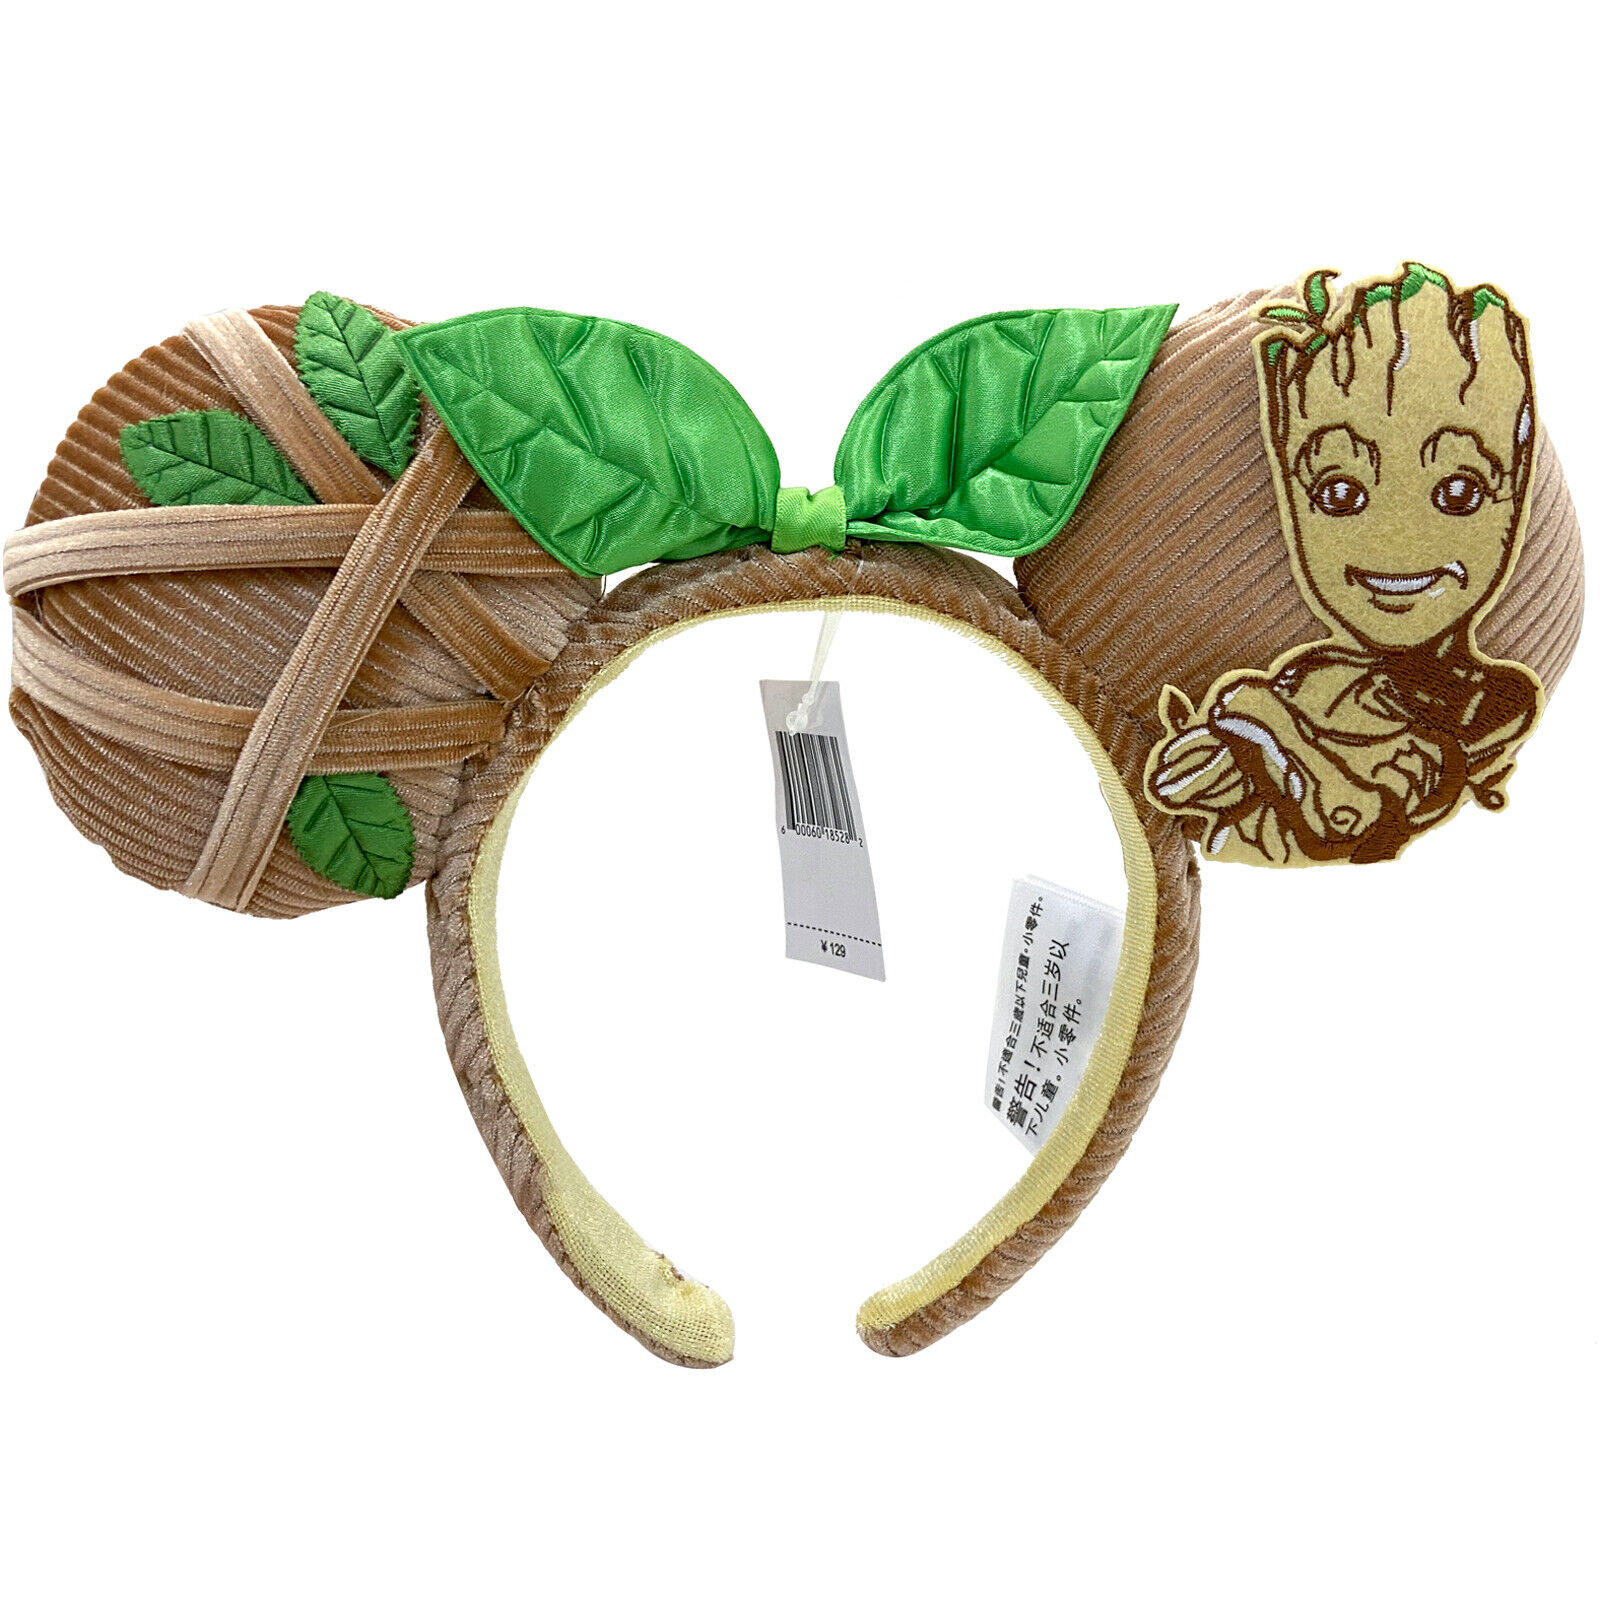 DisneyParks I Am Groot Marvel Guardians of the Galaxy Minnie Mouse Headband Ears